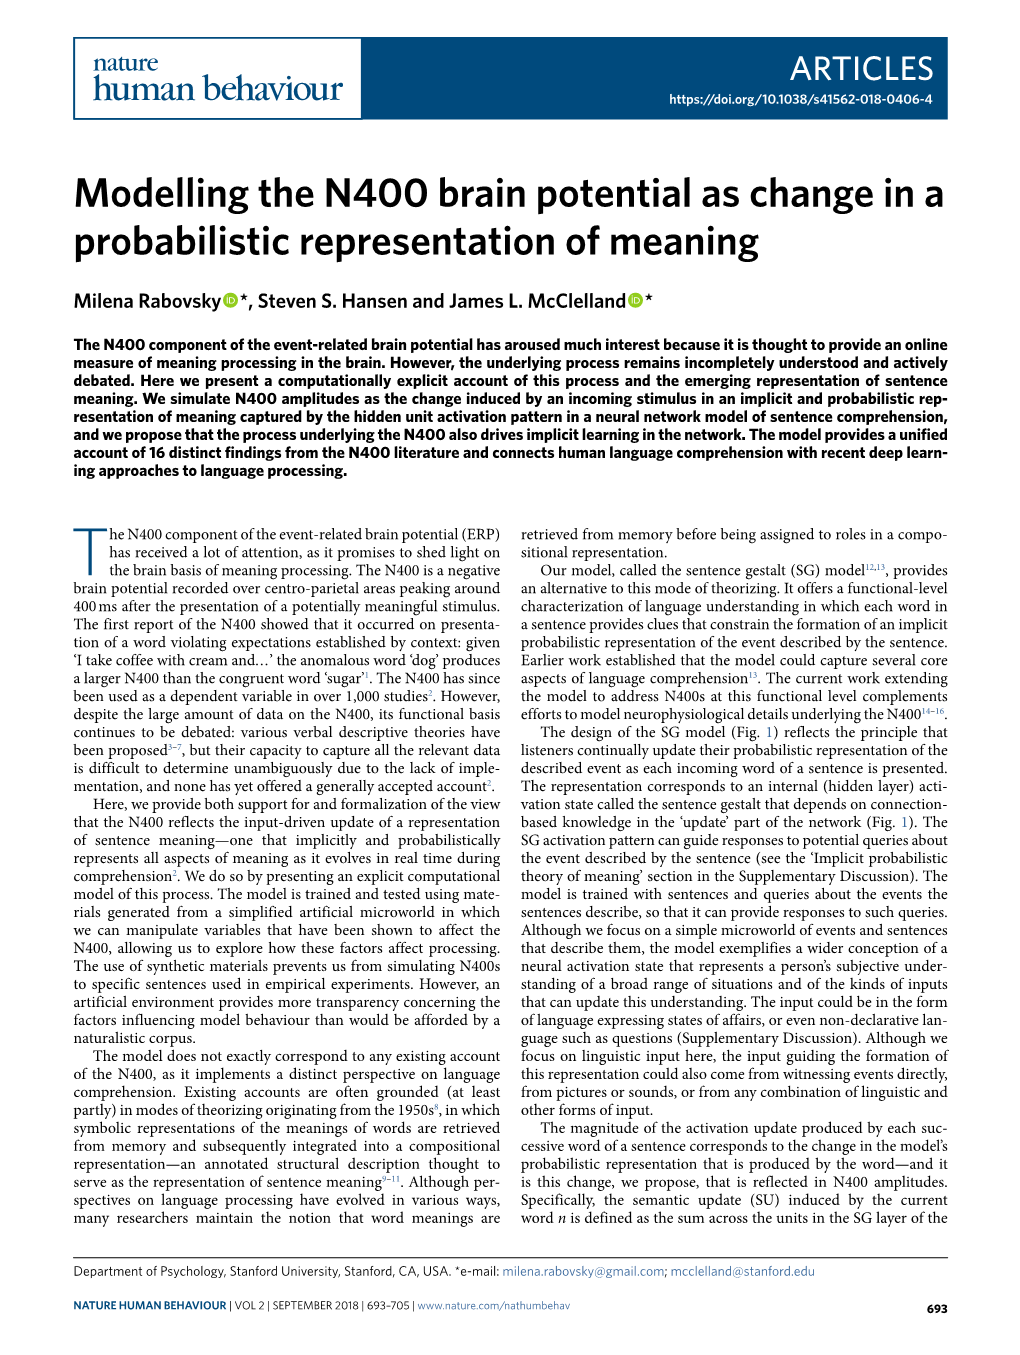 Modelling the N400 Brain Potential As Change in a Probabilistic Representation of Meaning